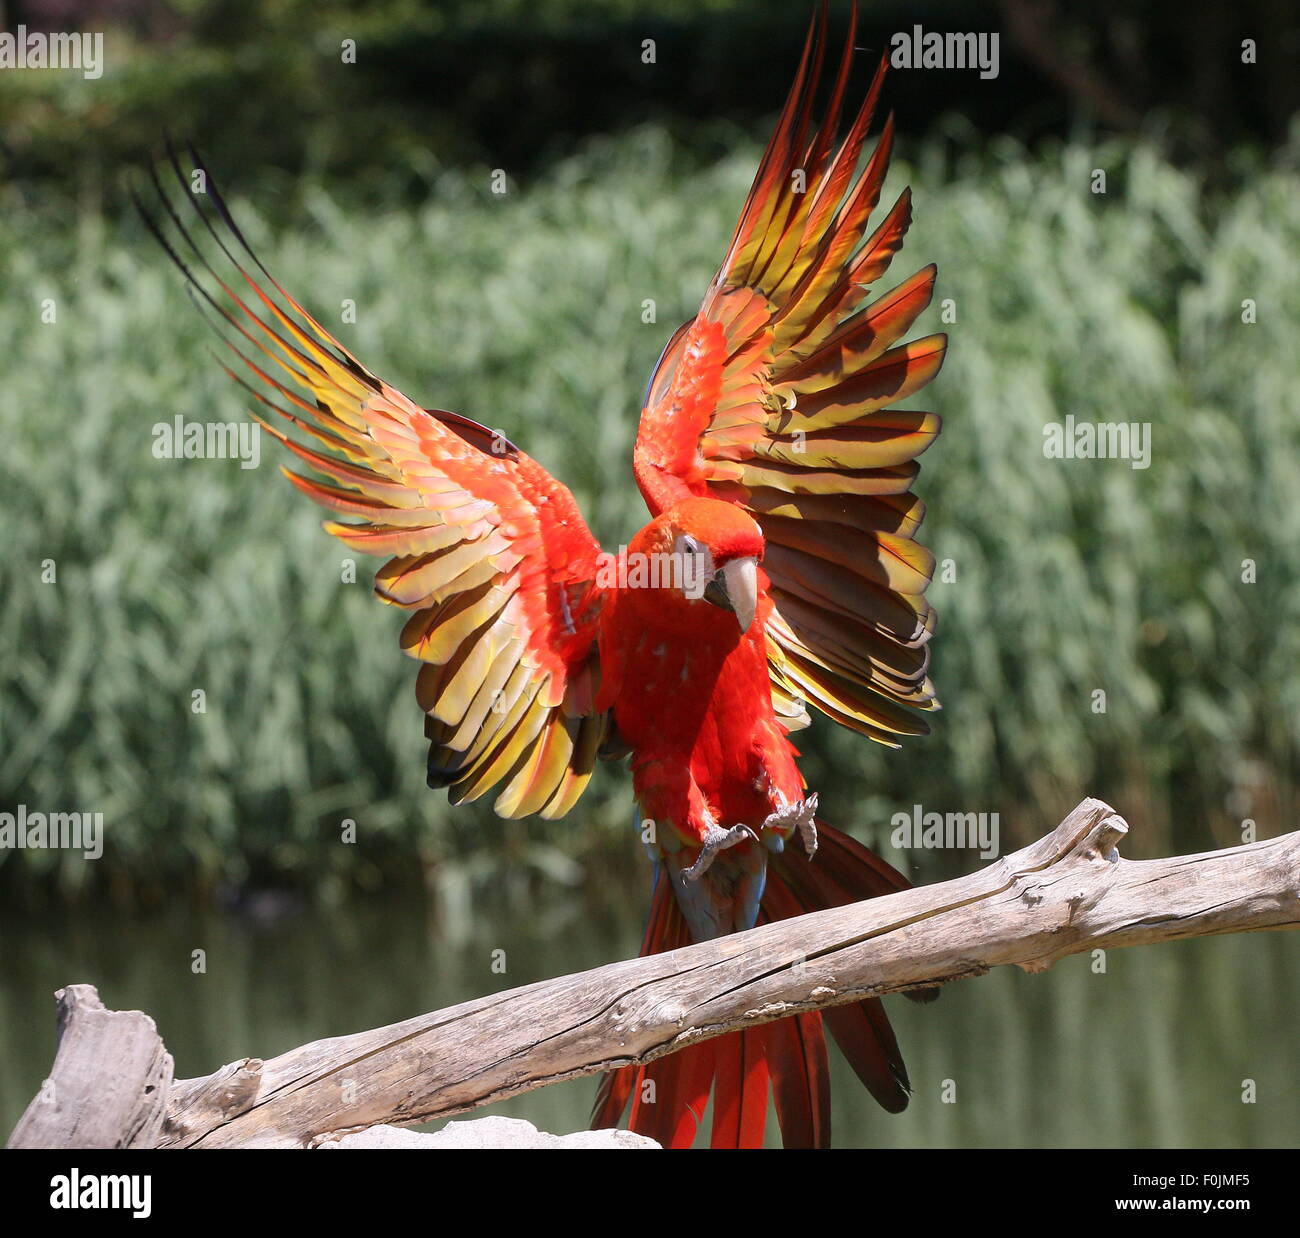 South American Scarlet macaw (Ara macao) in flight, incoming and landing on a branch, wings outstretched Stock Photo